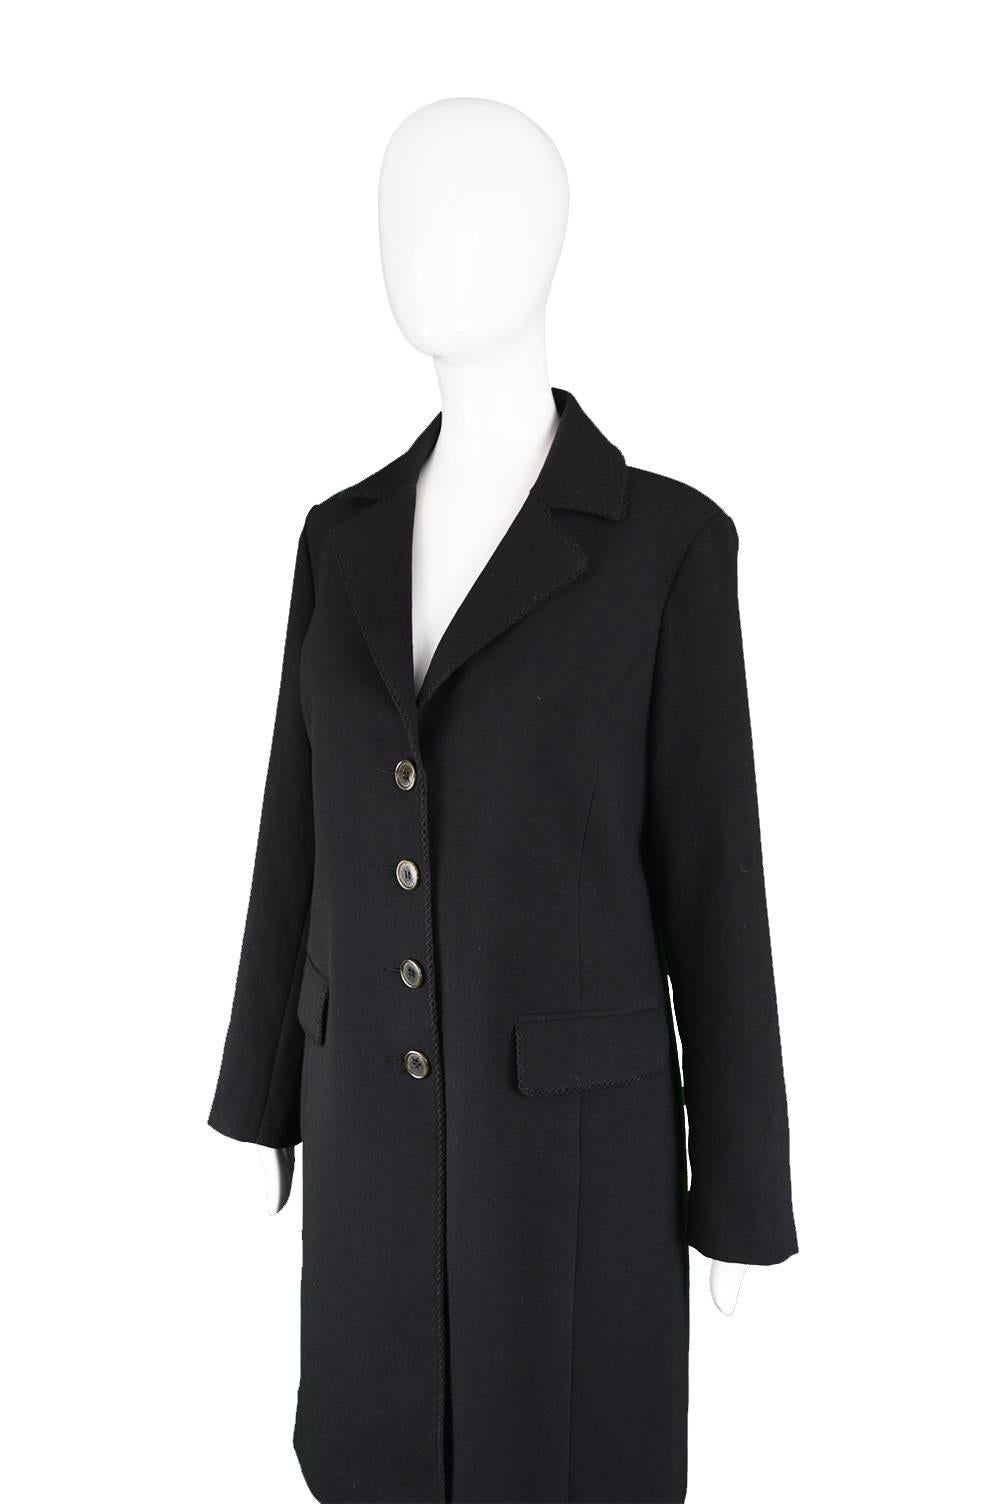 Romeo Gigli Vintage Women's Black Embroidered Trim Single Breasted Coat, 1990s For Sale 2